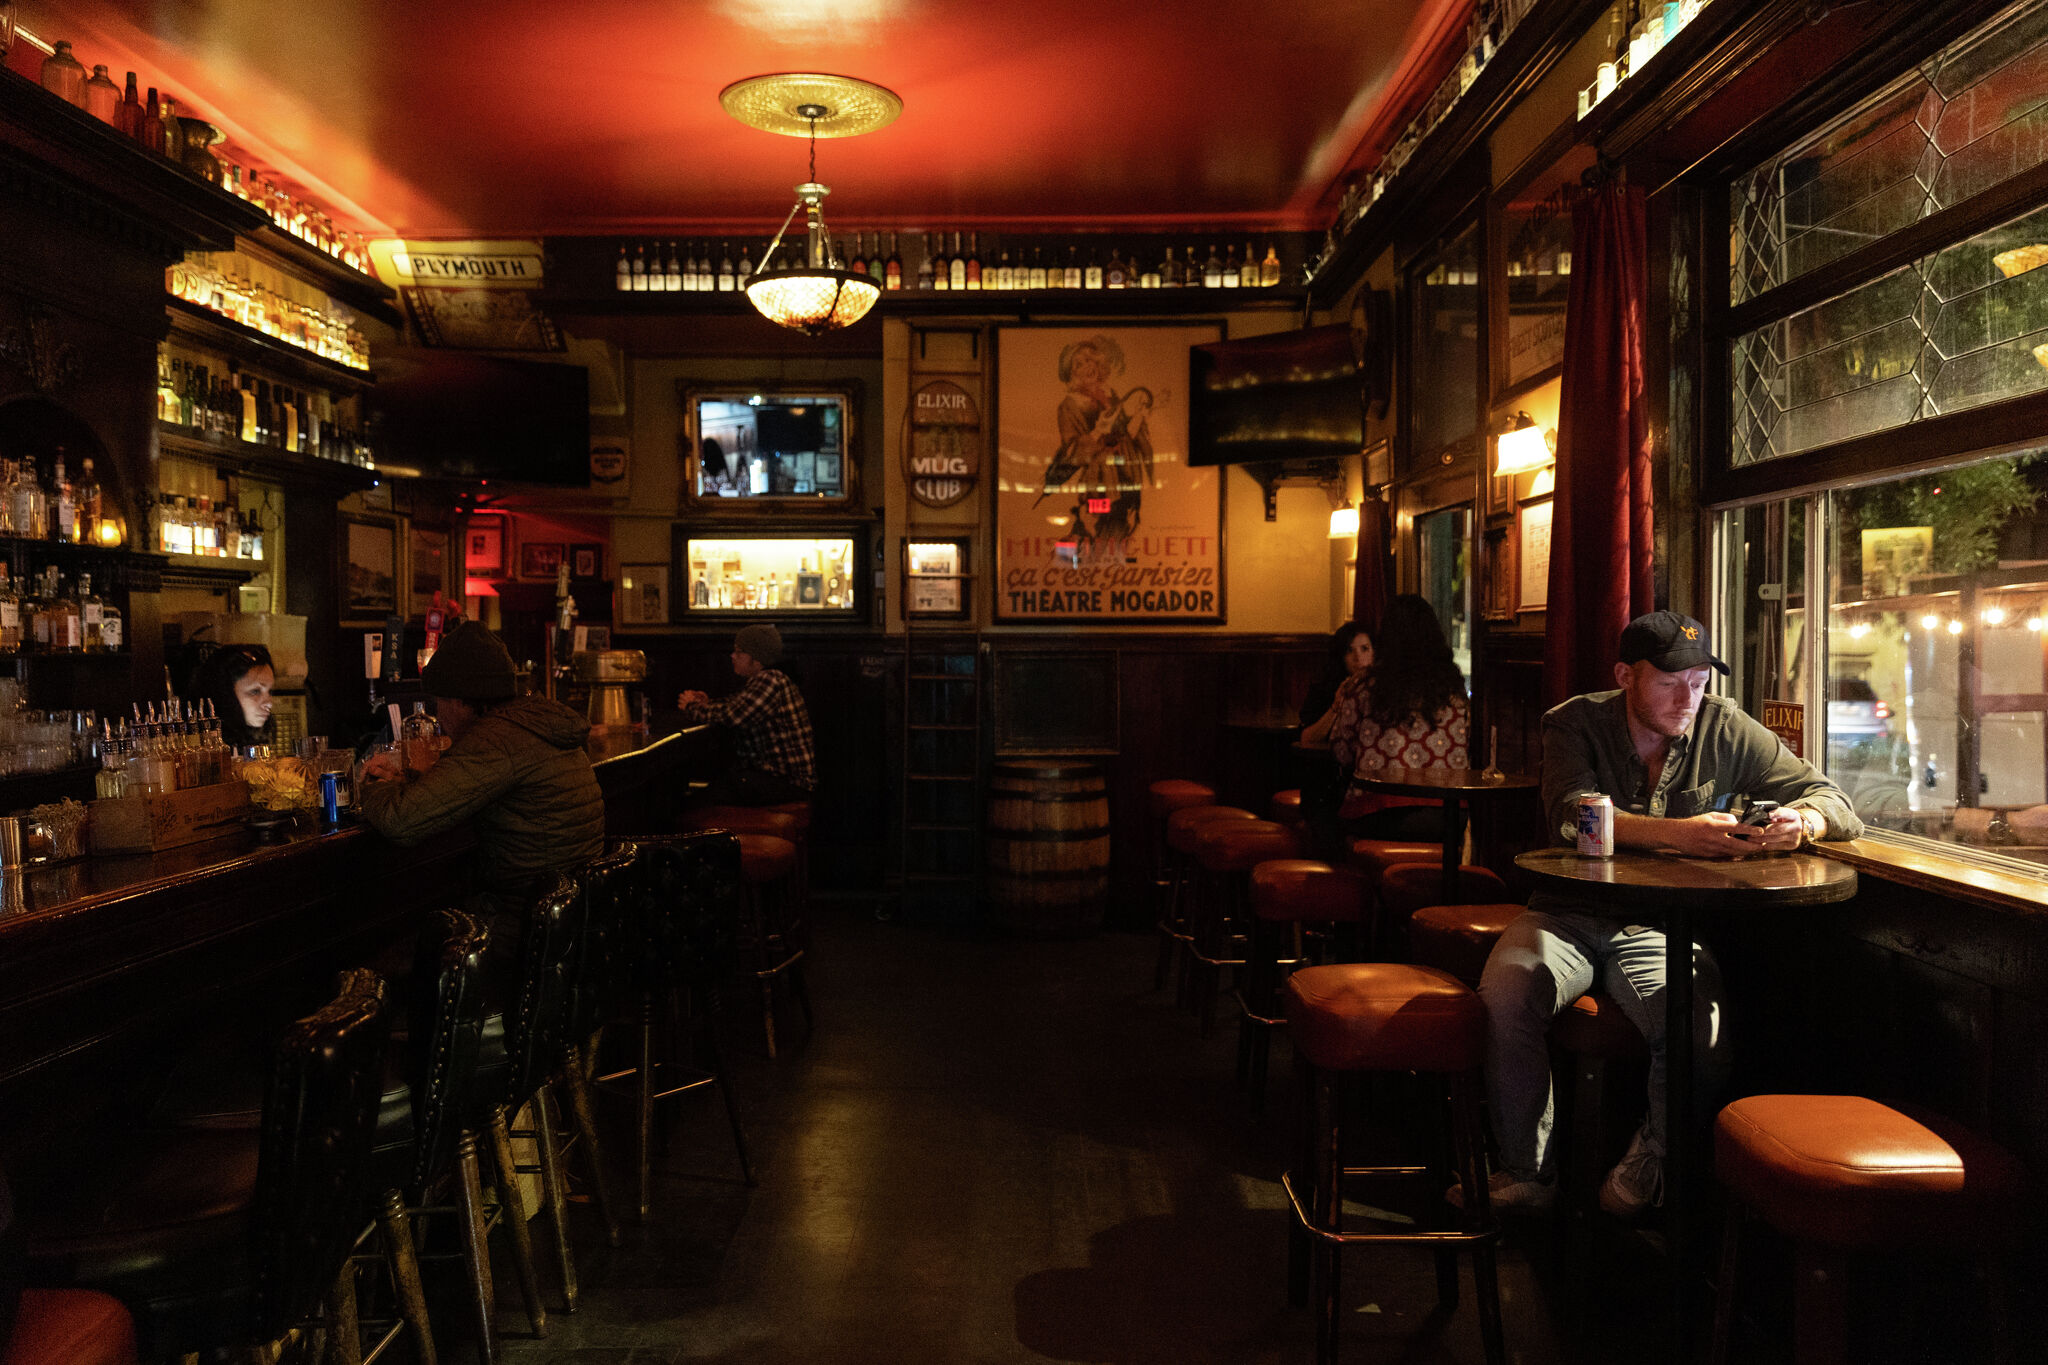 Crowds have flocked to SF's second oldest bar for over 160 years